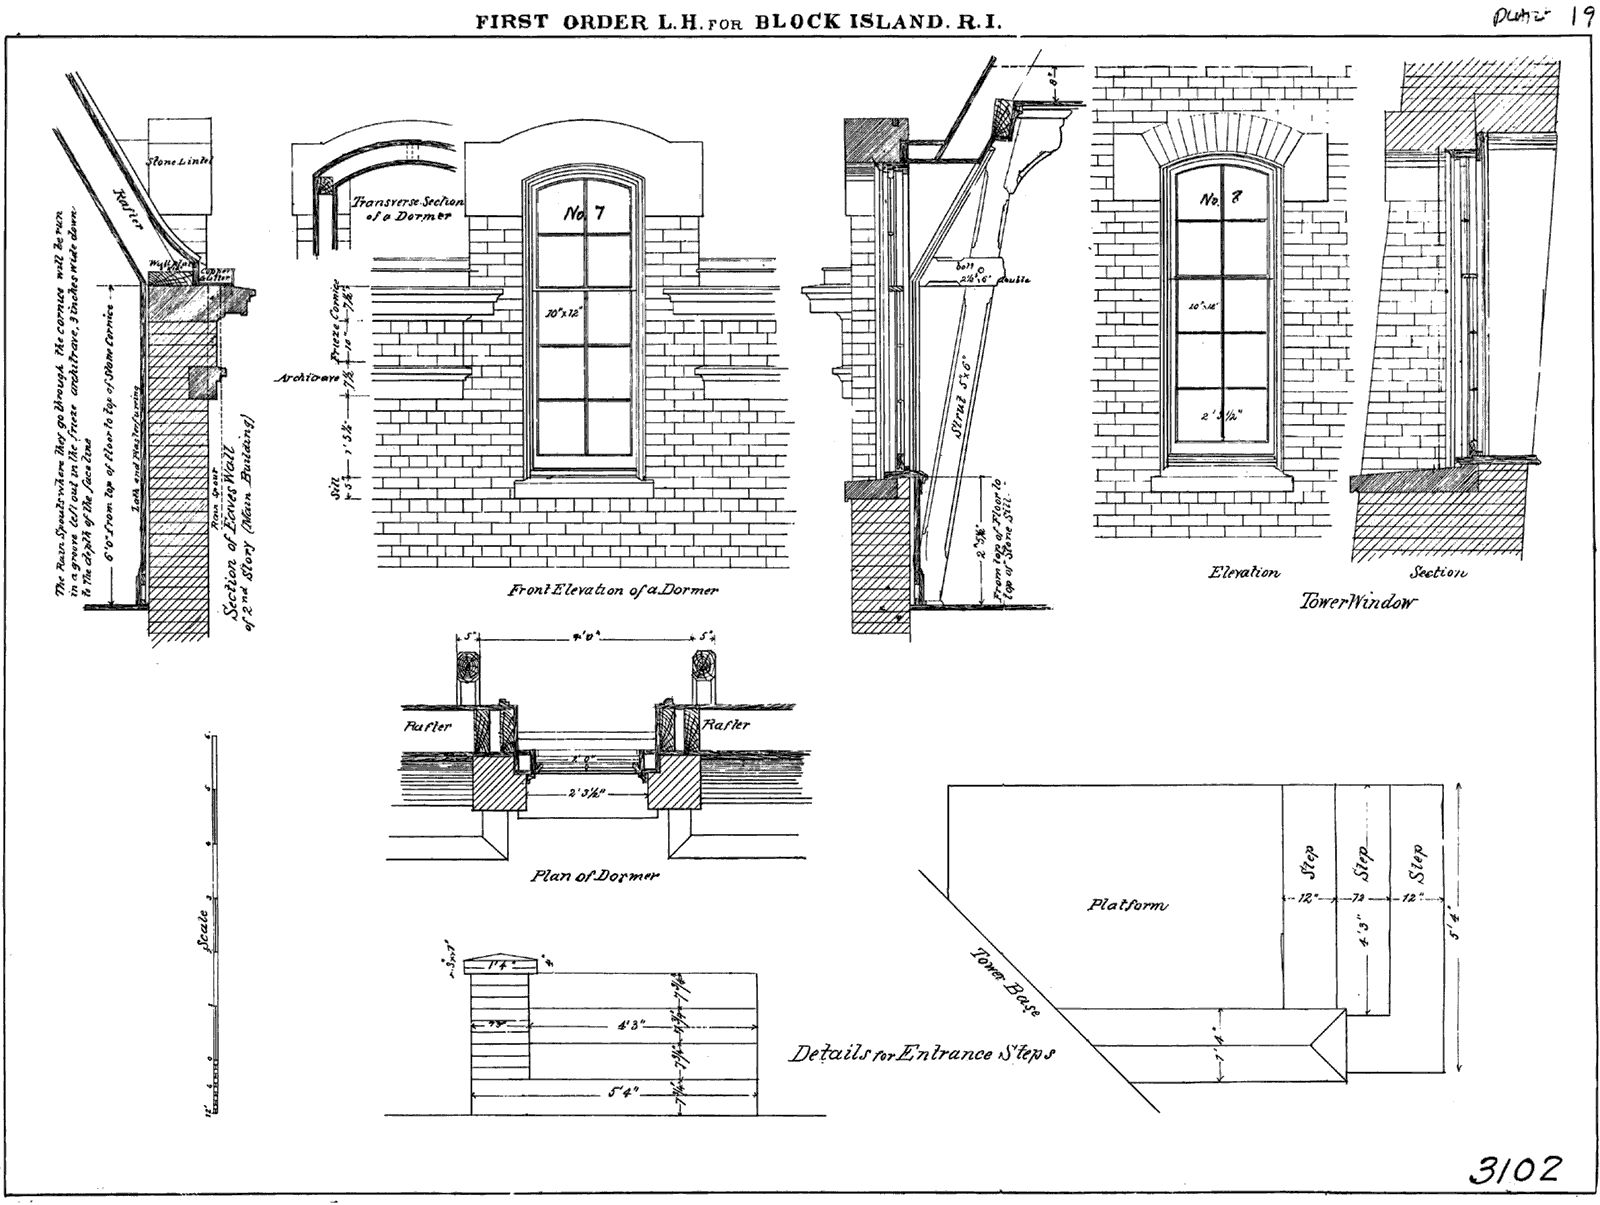 Plan for Block Island Southeast Lighthouse's entrance steps, dormer, and caves 